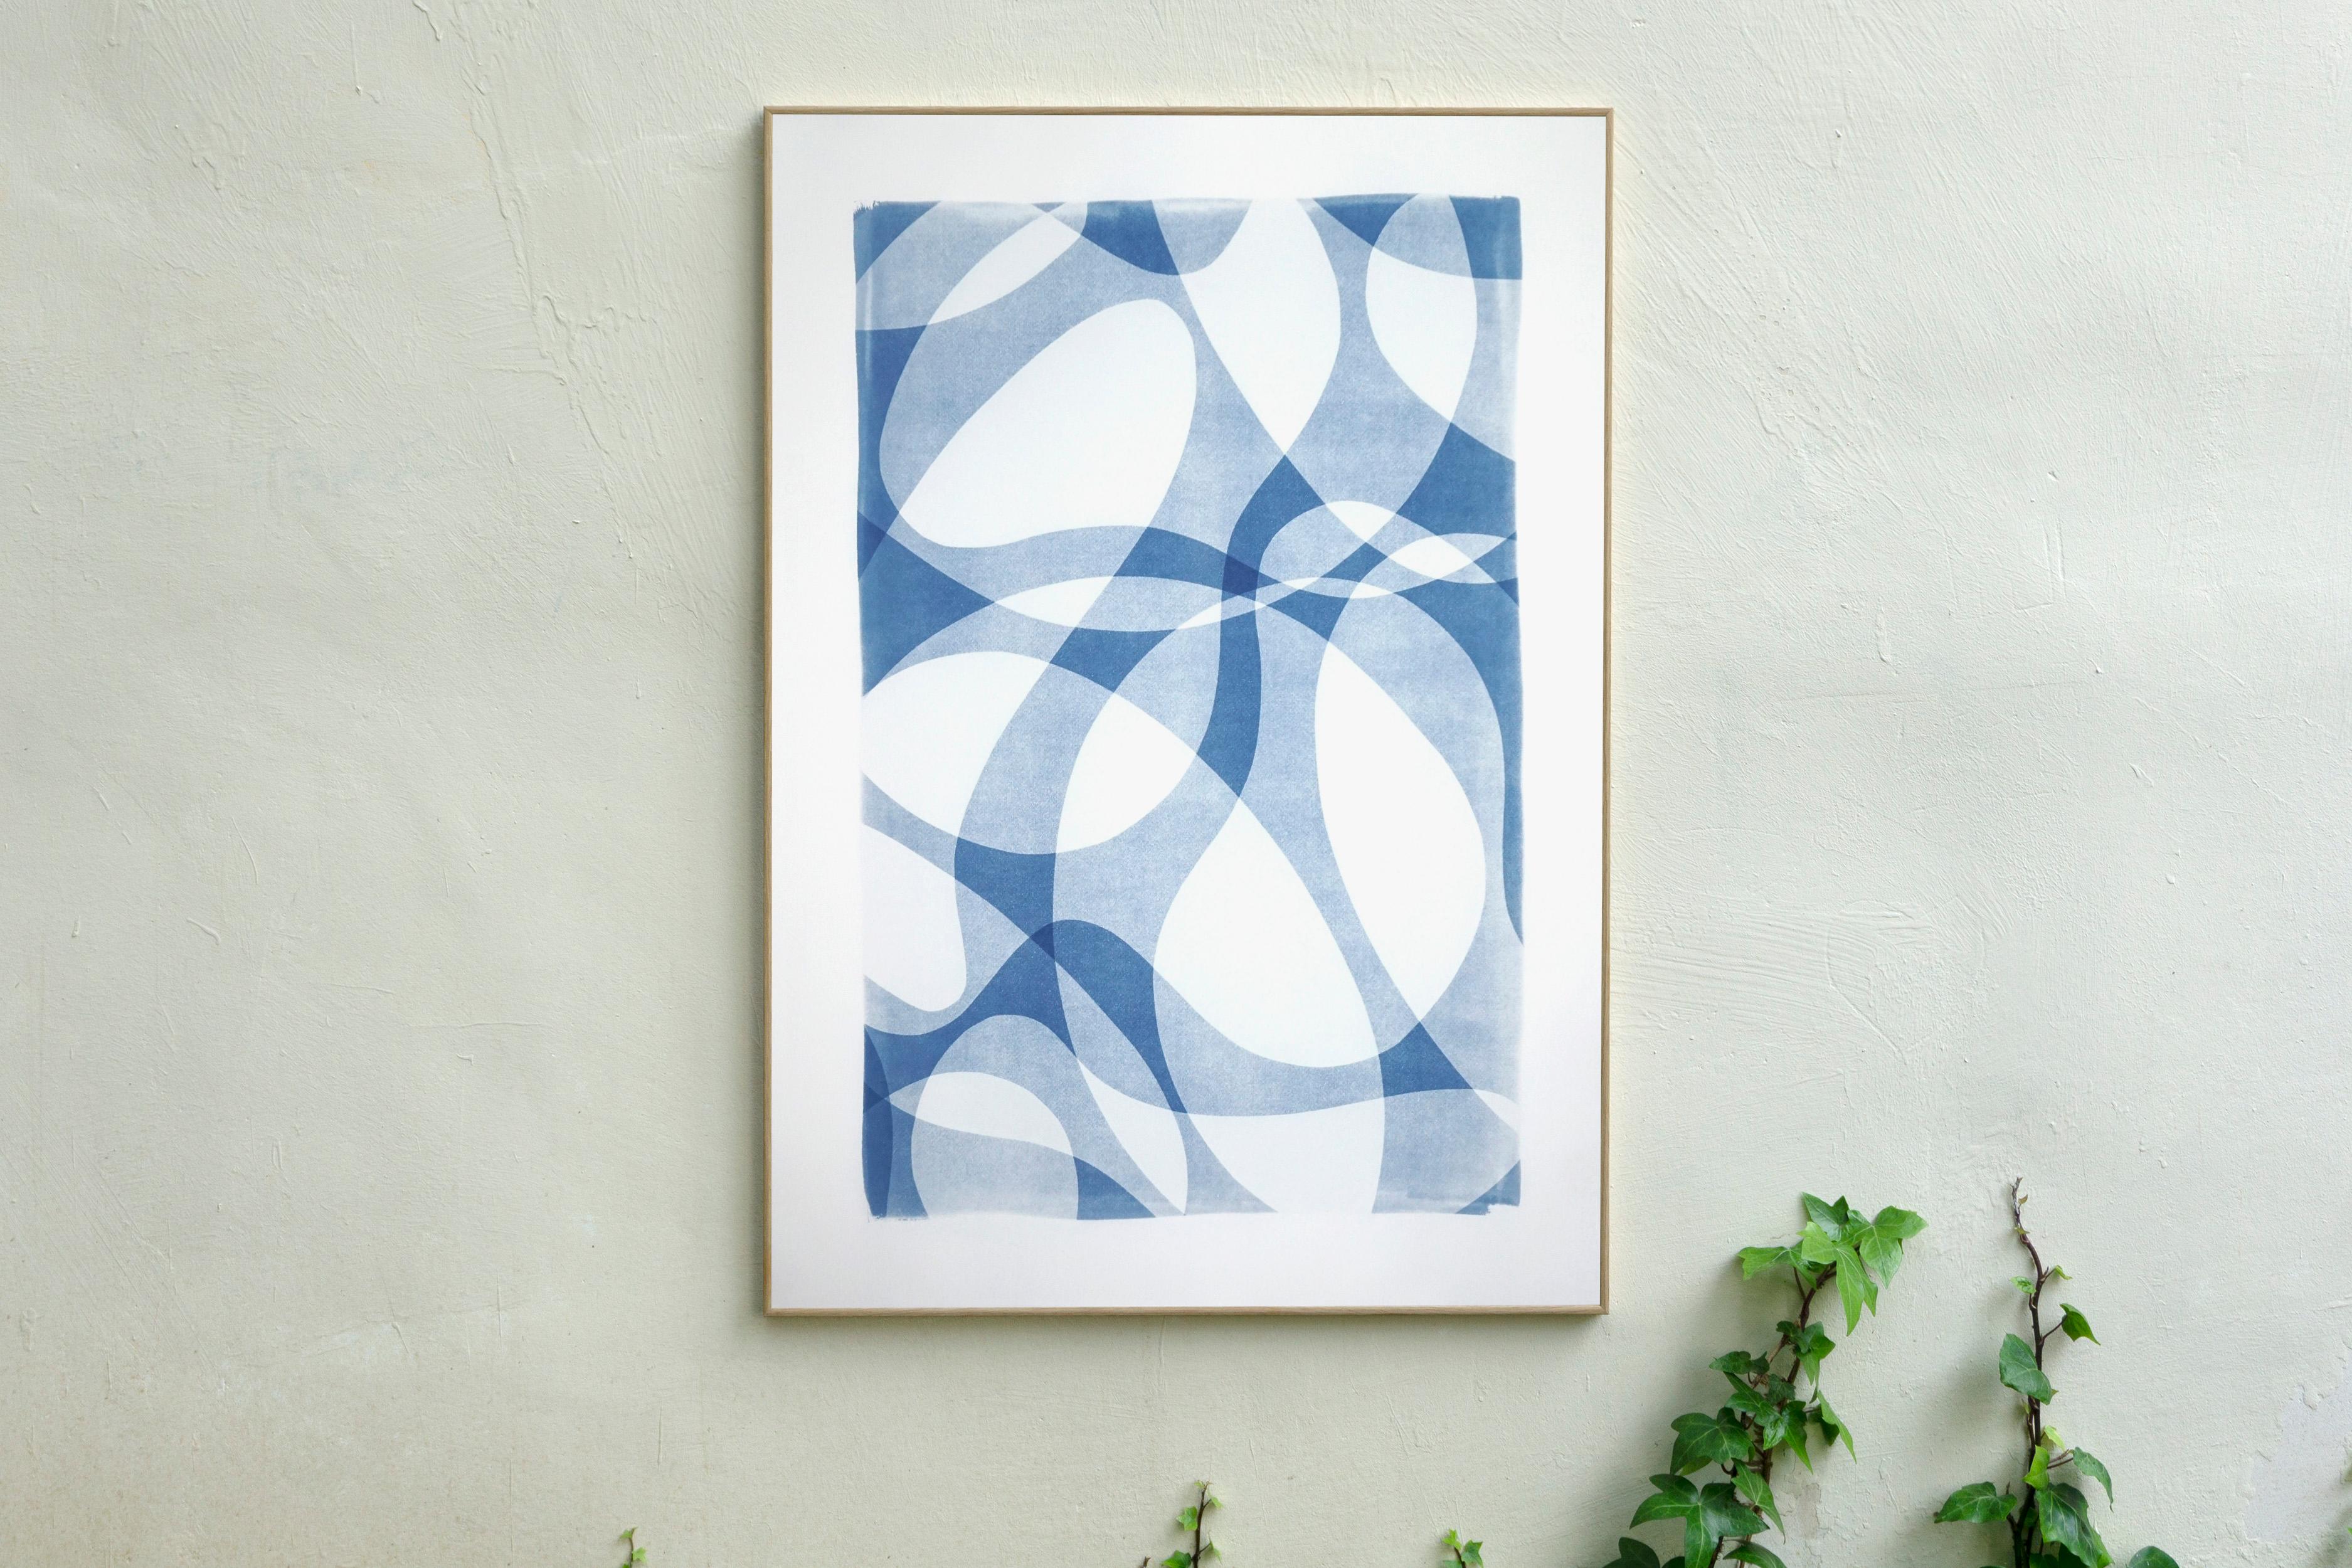 This is an exclusive handprinted unique cyanotype that takes its inspiration from the mid-century modern shapes.
It's made by layering paper cutouts and different exposures using uv-light. 

Details:
+ Title: Line Contours in Shade Gradients II
+